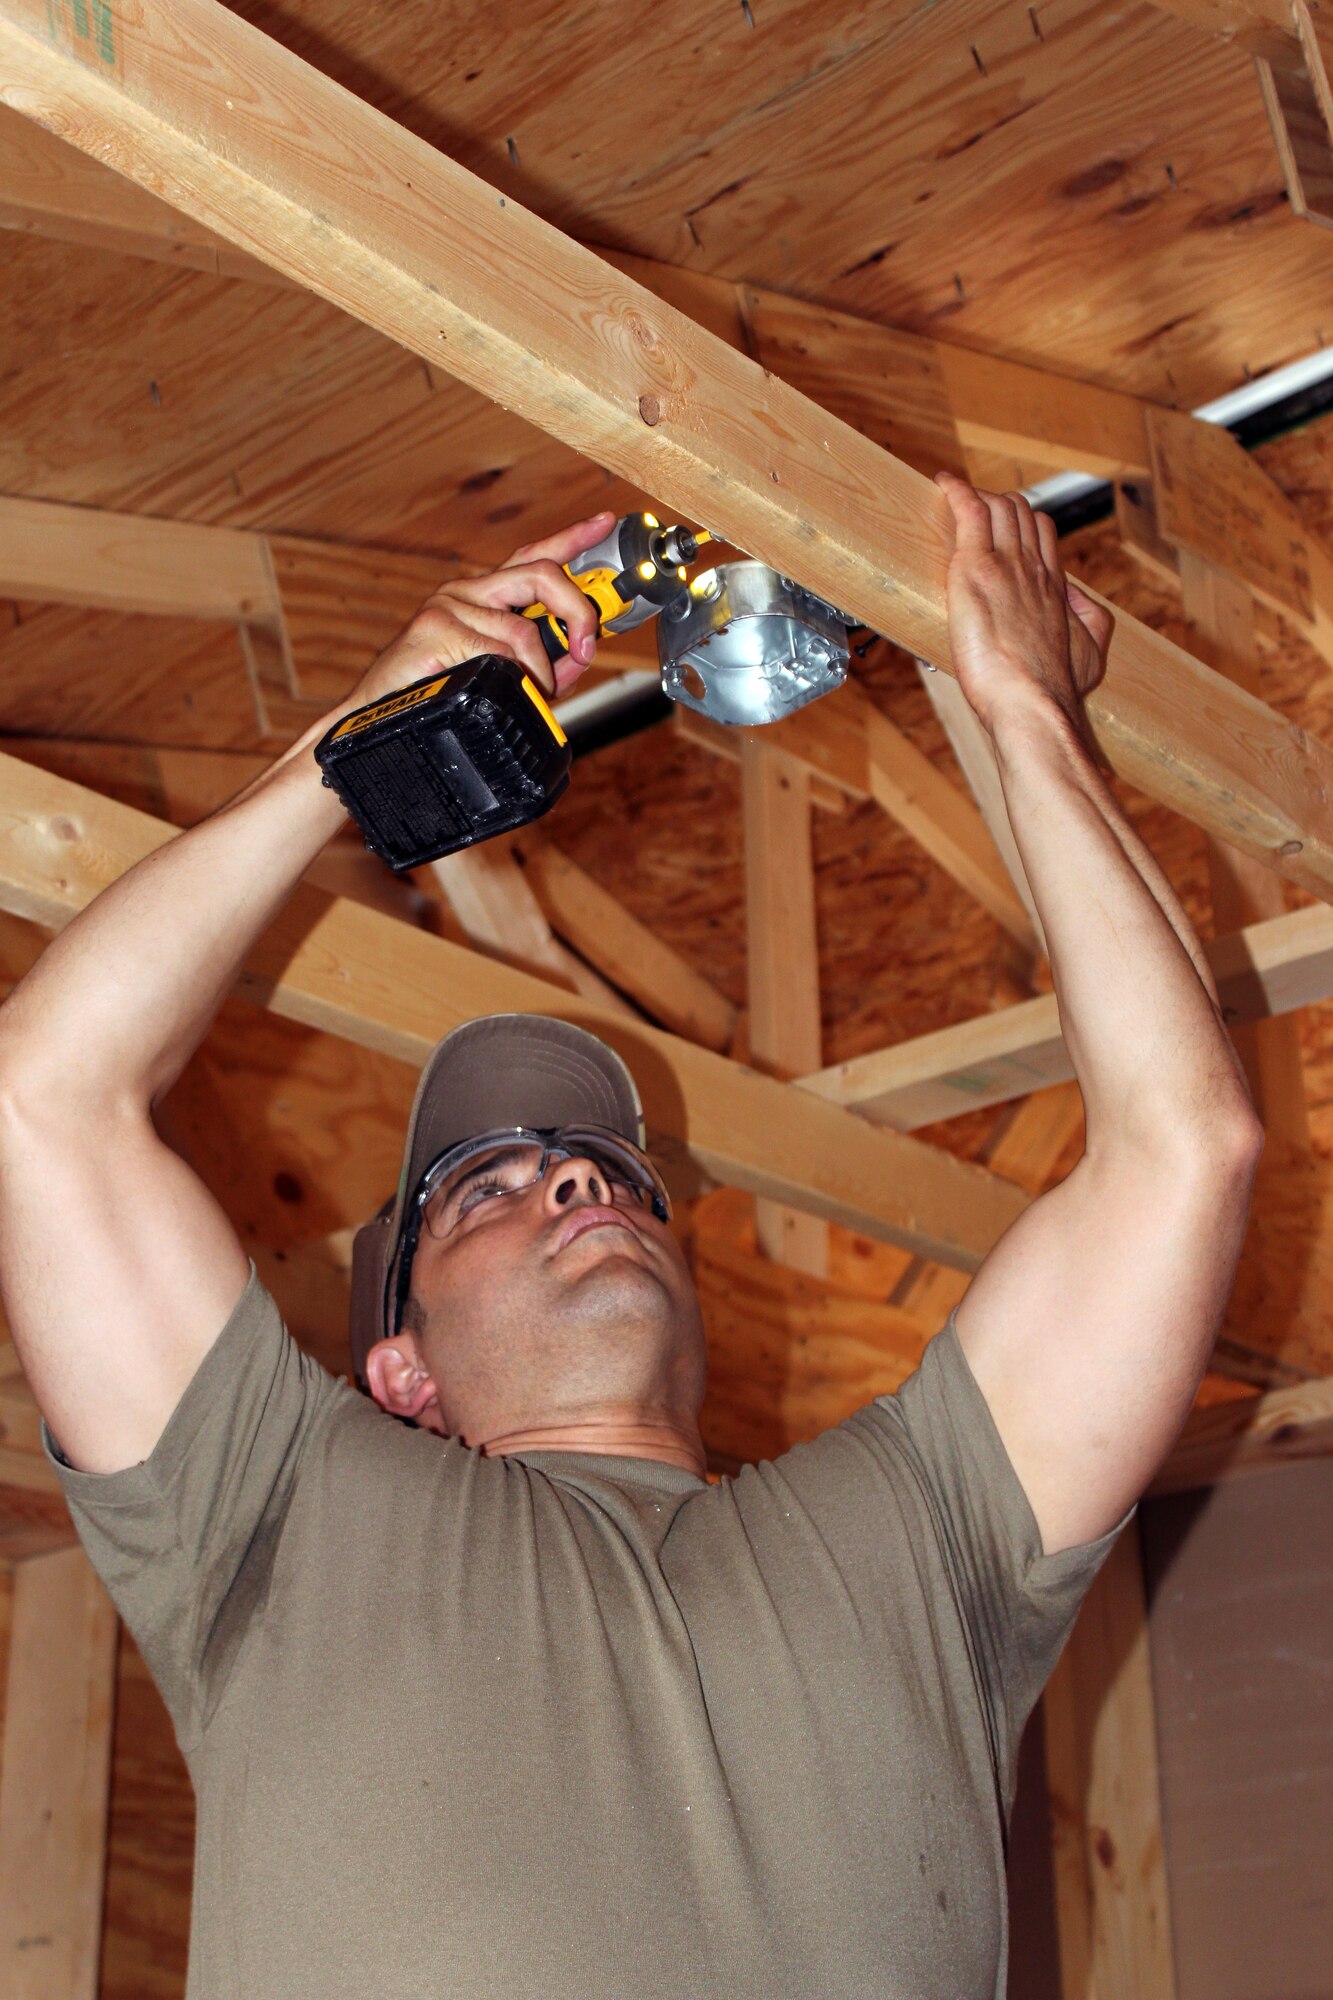 Tech. Sgt. Javier Garcia installs a light fixture in a temporary building at at Selfridge Air National Guard Base, Mich., June 6, 2021. The 127th Civil Engineer Squadron built the building to be able to conduct hands-on building trades training.